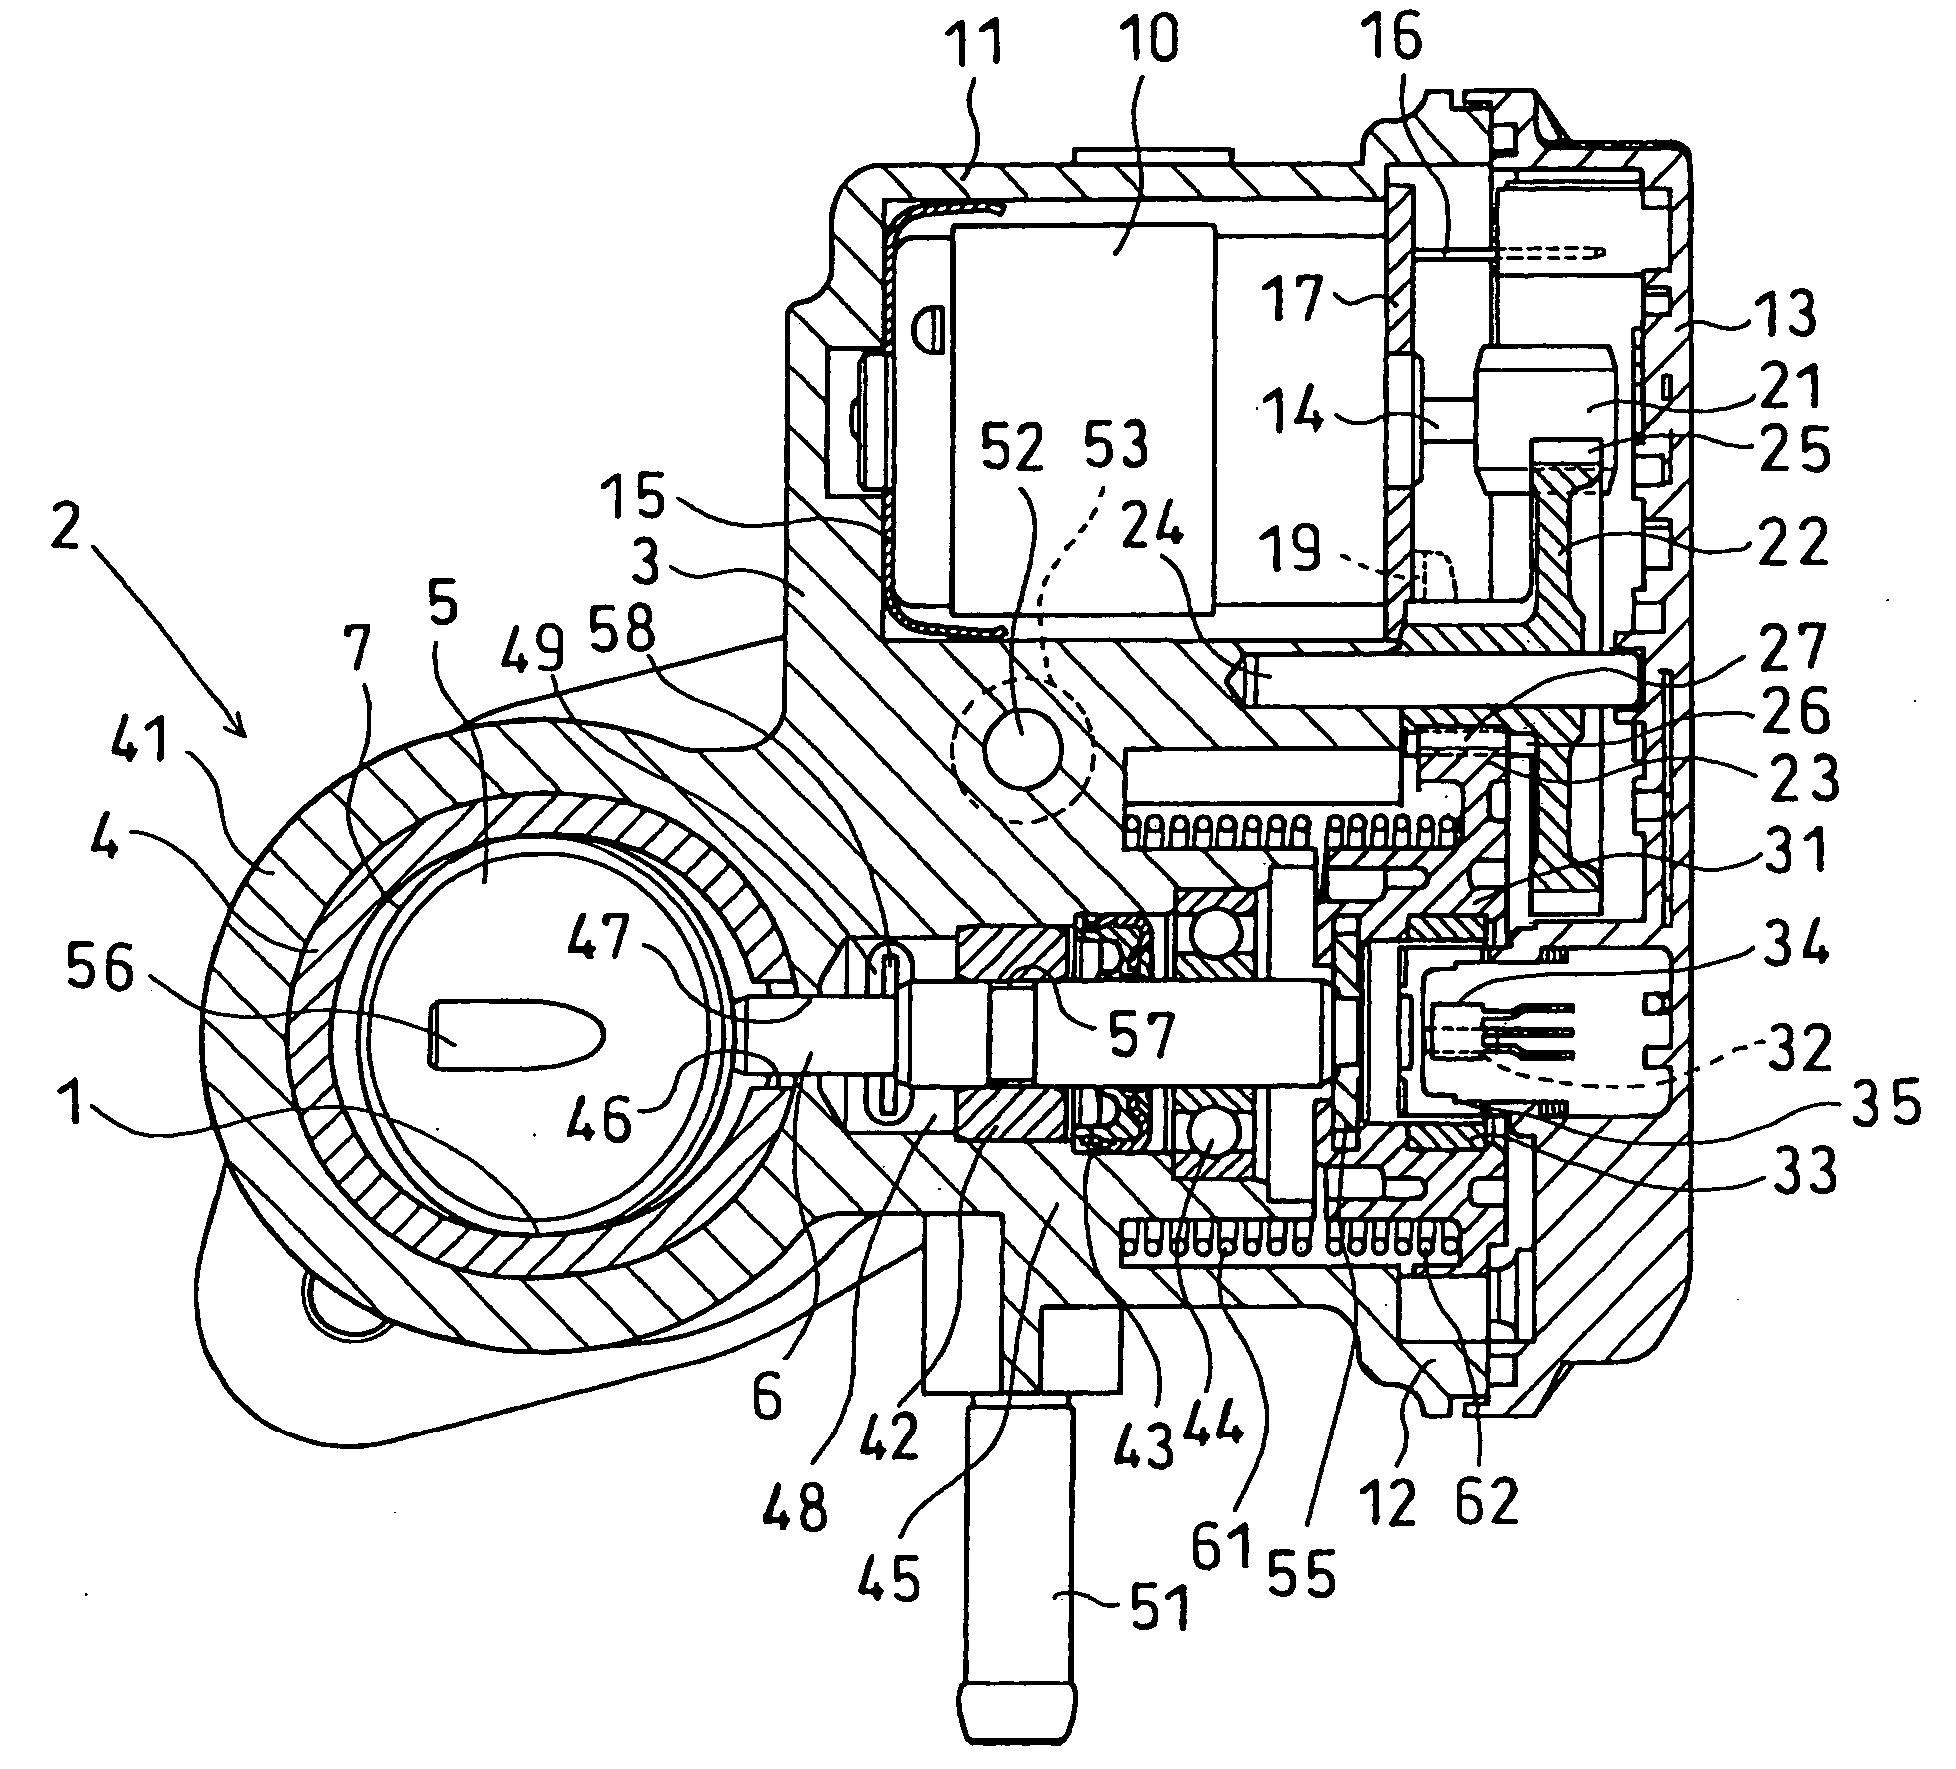 Emission gas recycling equipment having butterfly valve